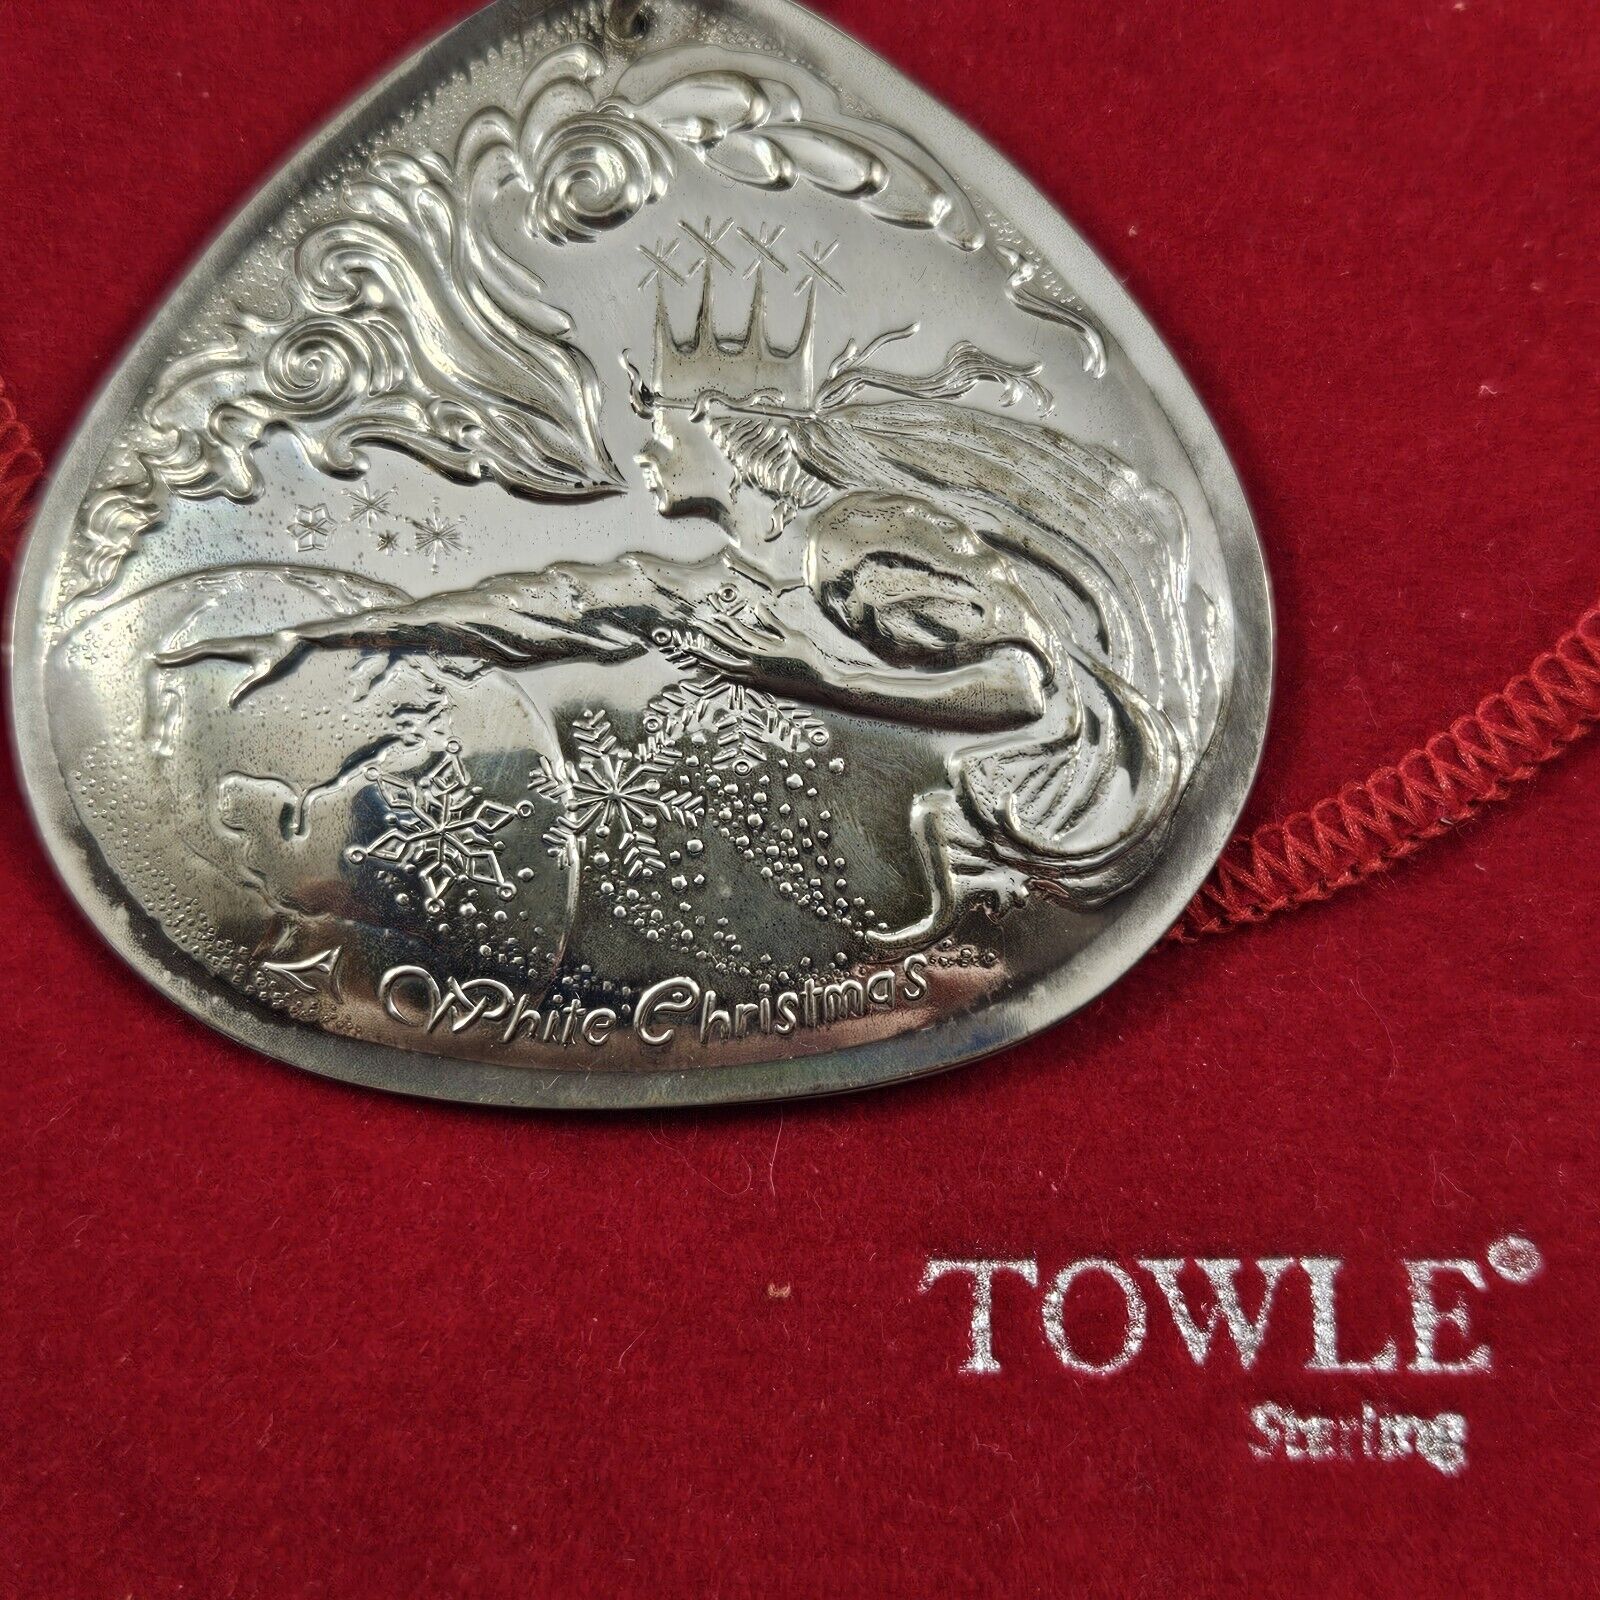 Towle Sterling Silver White Christmas Ornament 1987 Medallion Vintage 